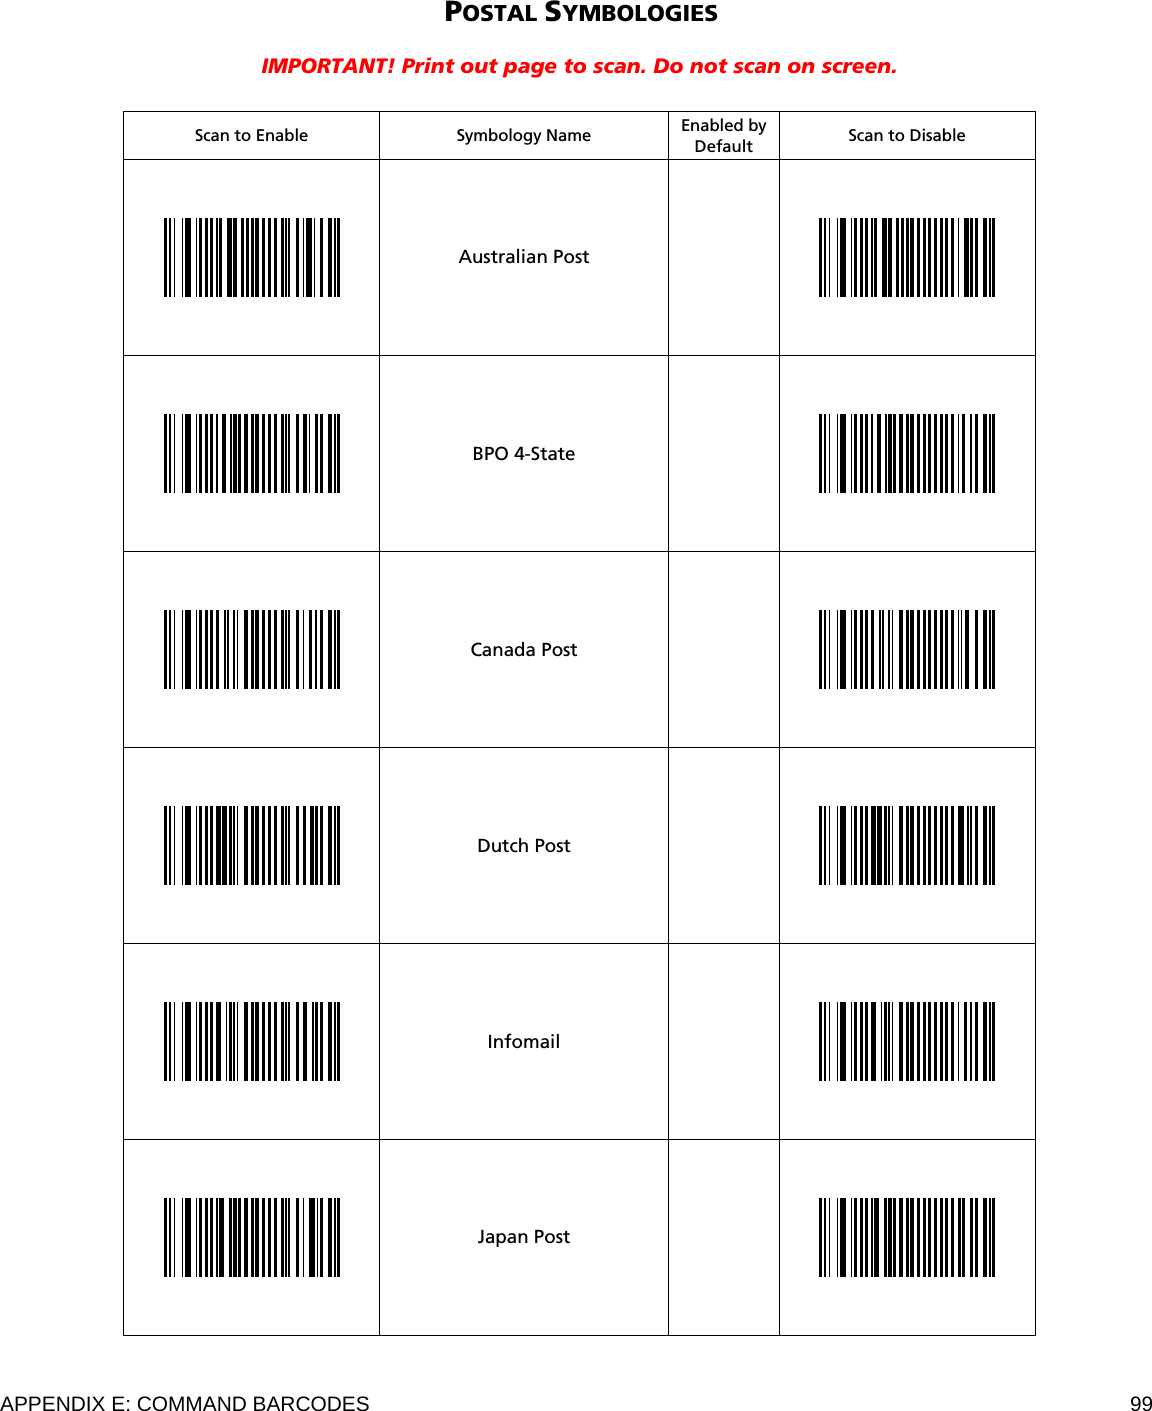  APPENDIX E: COMMAND BARCODES  99 POSTAL SYMBOLOGIES  IMPORTANT! Print out page to scan. Do not scan on screen.   Scan to Enable  Symbology Name Enabled by Default  Scan to Disable  Australian Post     BPO 4-State     Canada Post     Dutch Post    Infomail     Japan Post      